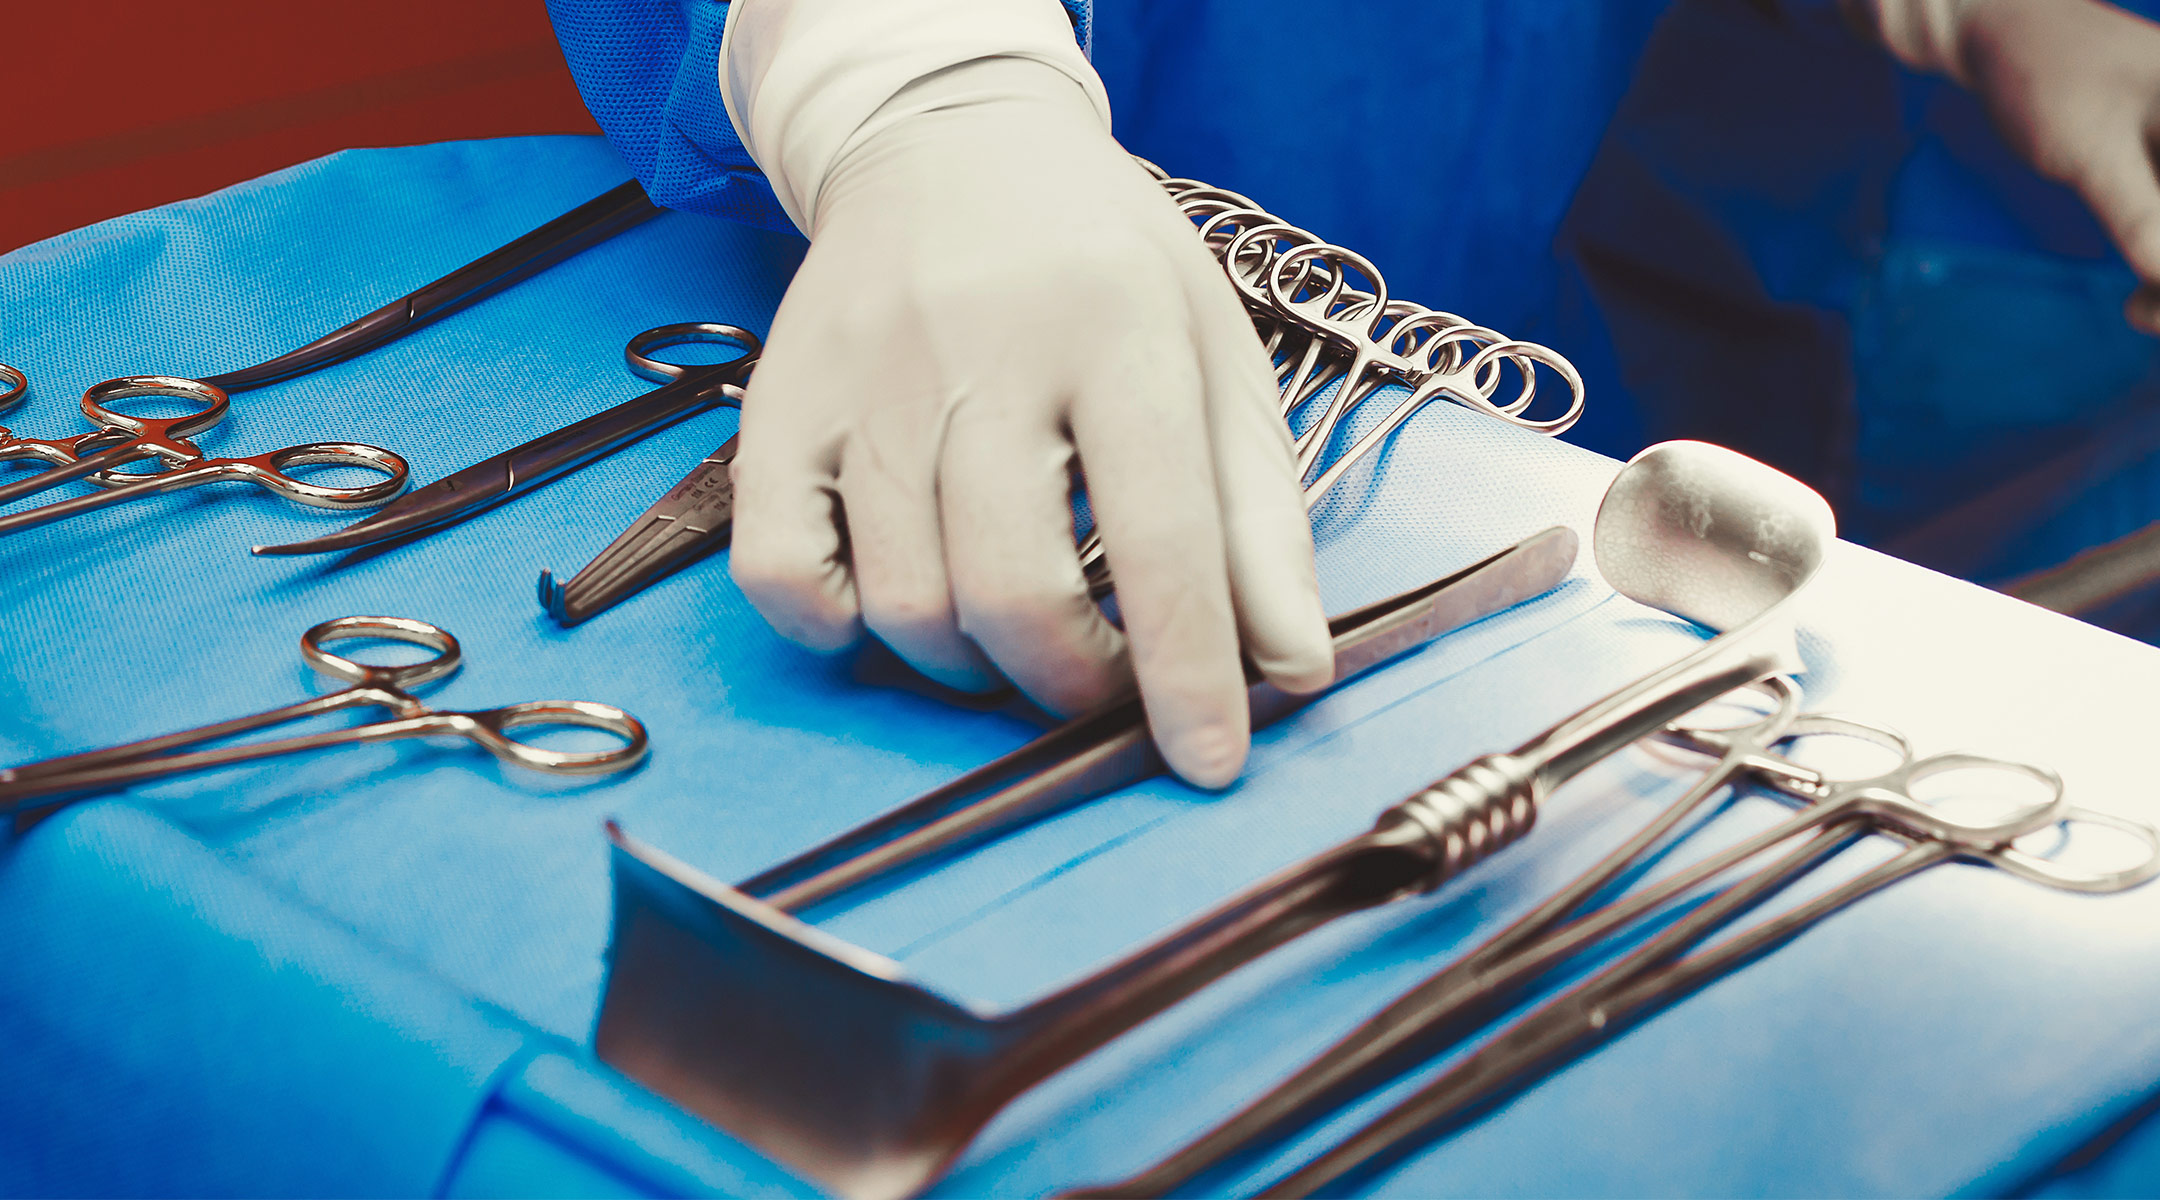 surgeon's hand selecting tools for operation